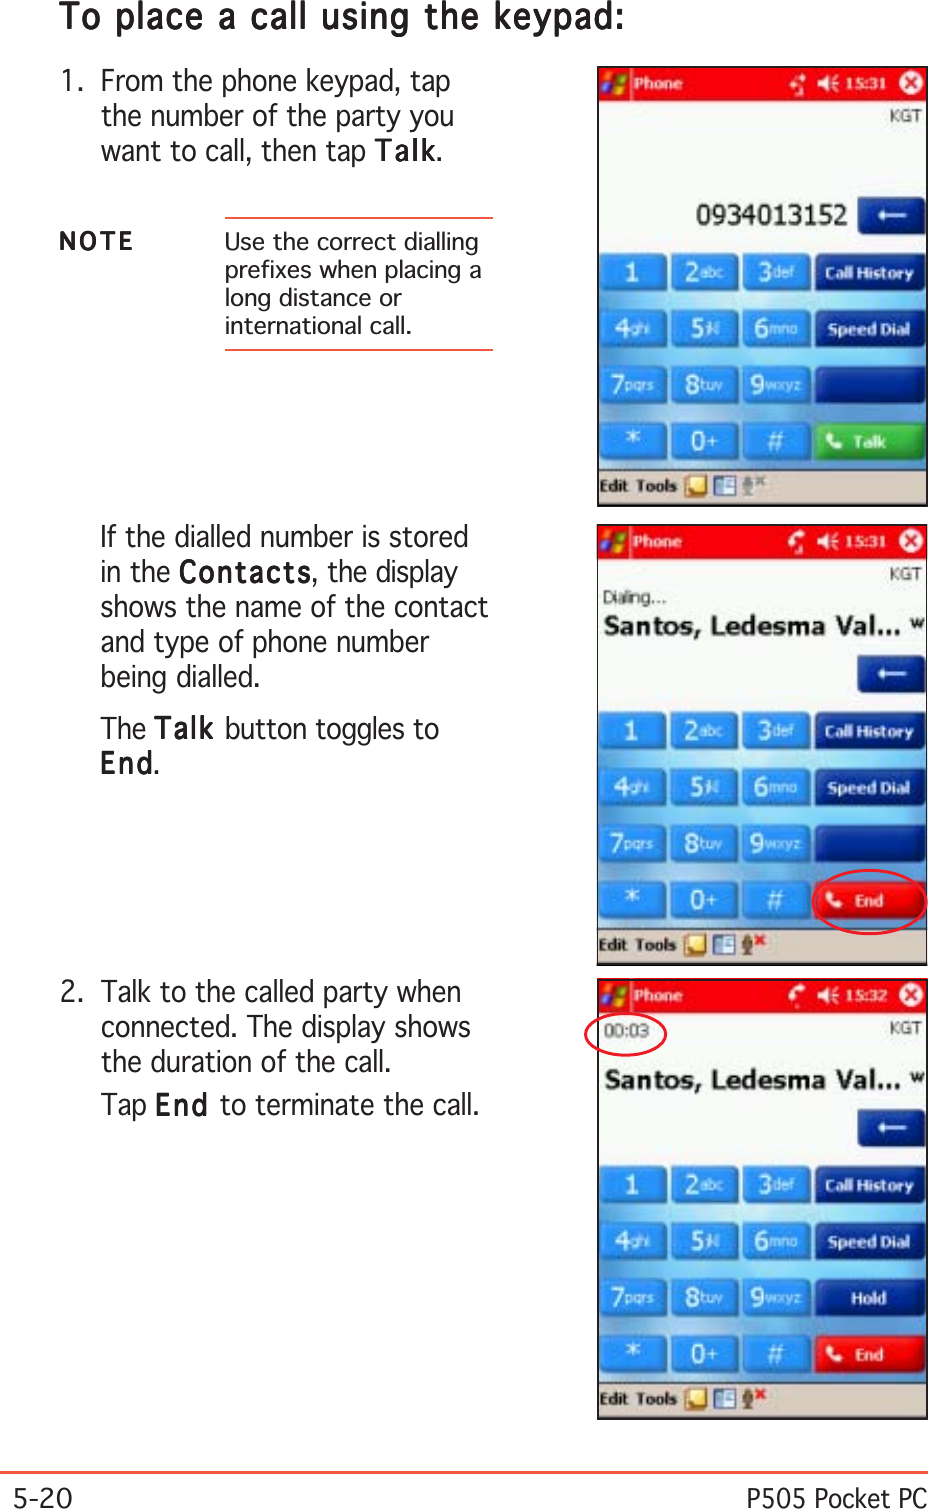 5-20P505 Pocket PCTo place a call using the keypad:To place a call using the keypad:To place a call using the keypad:To place a call using the keypad:To place a call using the keypad:1. From the phone keypad, tapthe number of the party youwant to call, then tap TalkTalkTalkTalkTalk.If the dialled number is storedin the ContactsContactsContactsContactsContacts, the displayshows the name of the contactand type of phone numberbeing dialled.The TalkTalkTalkTalkTalk button toggles toEndEndEndEndEnd.2. Talk to the called party whenconnected. The display showsthe duration of the call.Tap EndEndEndEndEn d to terminate the call.NOTENOTENOTENOTEN O T E Use the correct diallingprefixes when placing along distance orinternational call.